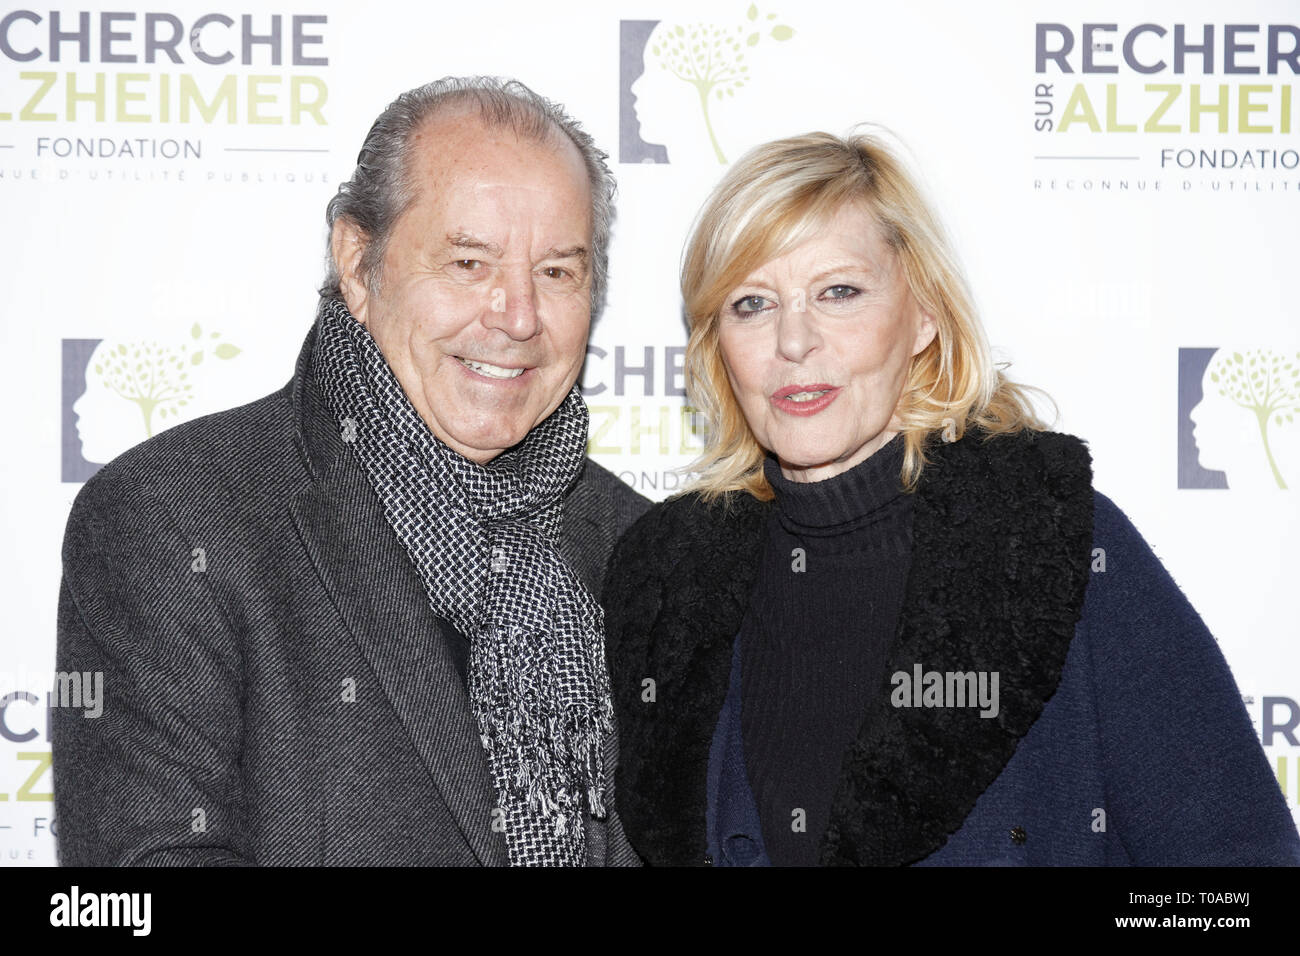 Paris, France. 18th Mar 2019. Christian Morin and Chantal Ladesou - Photocall of the 14th Gala 2019 of the Association for Alzheimer Research at the Olympia in Paris on March 18, 2019 Credit: Véronique PHITOUSSI/Alamy Live News Stock Photo